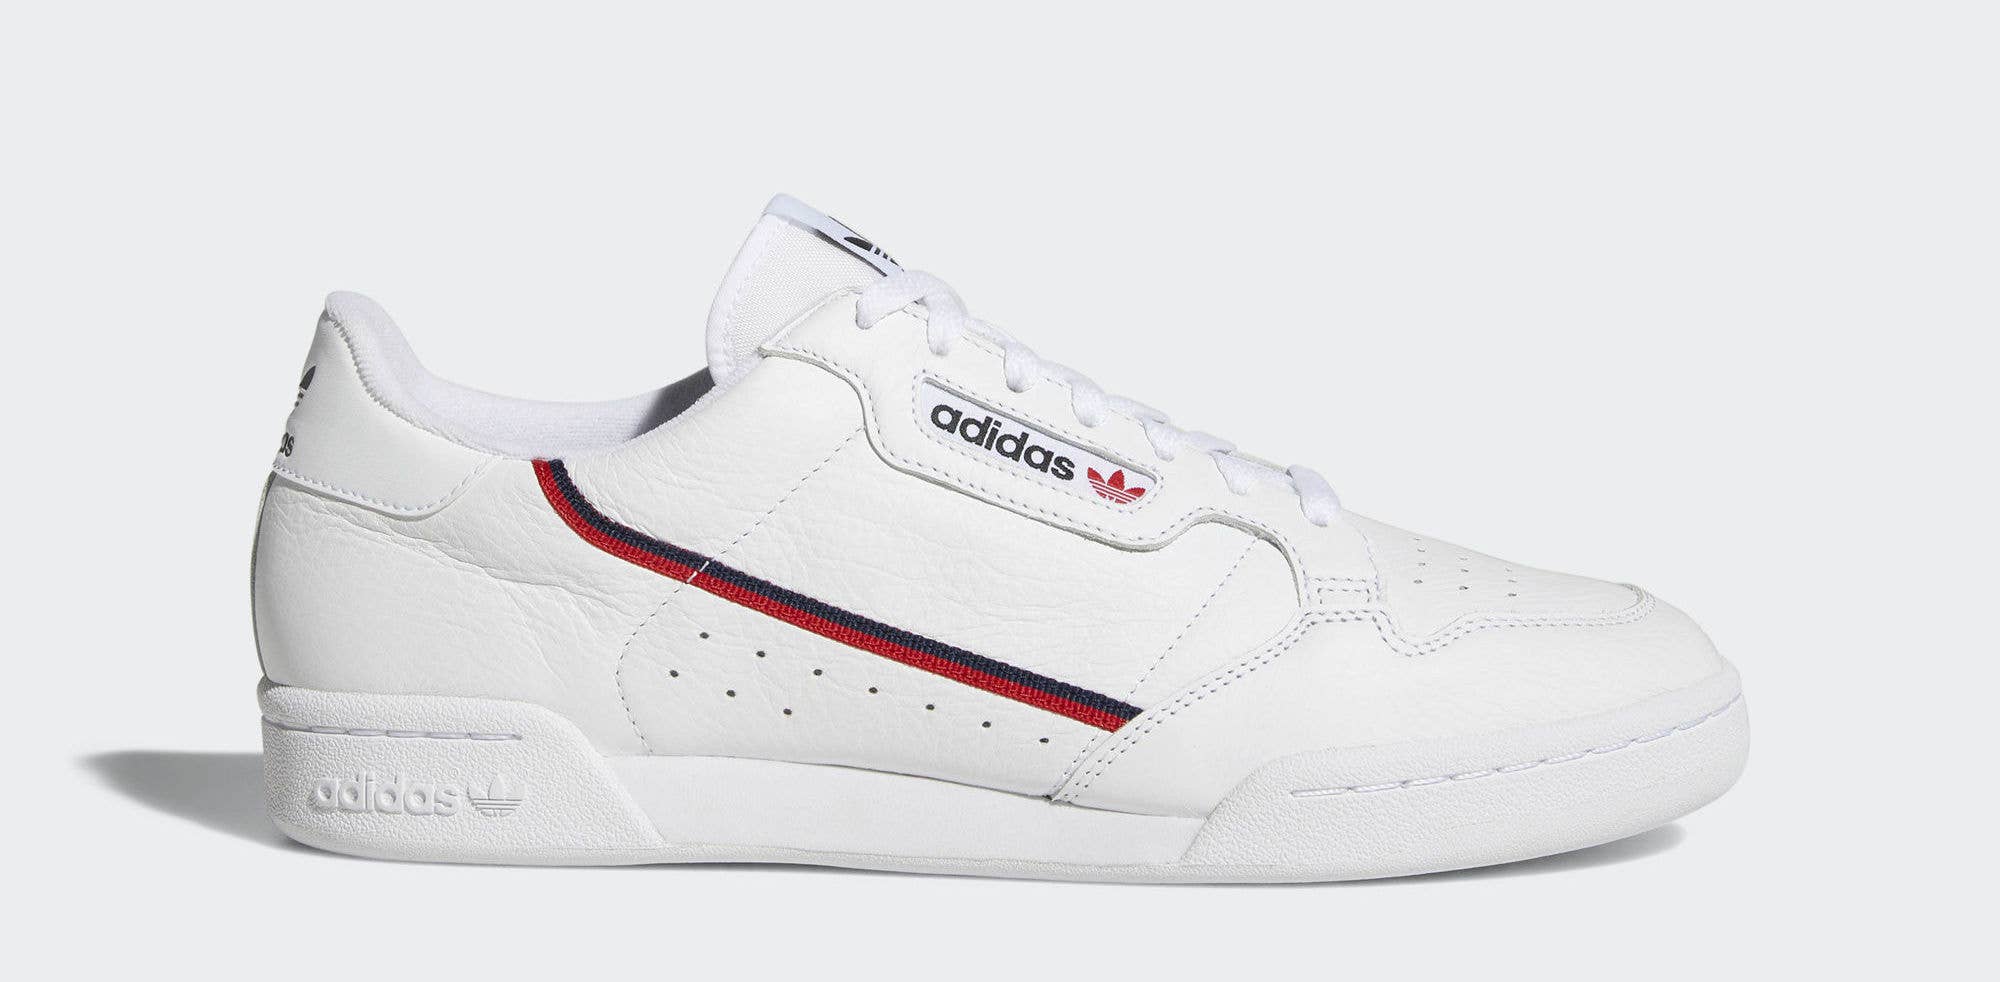 clásico dolor Muy lejos The Next Best Thing to the Adidas Yeezy Powerphase | Complex